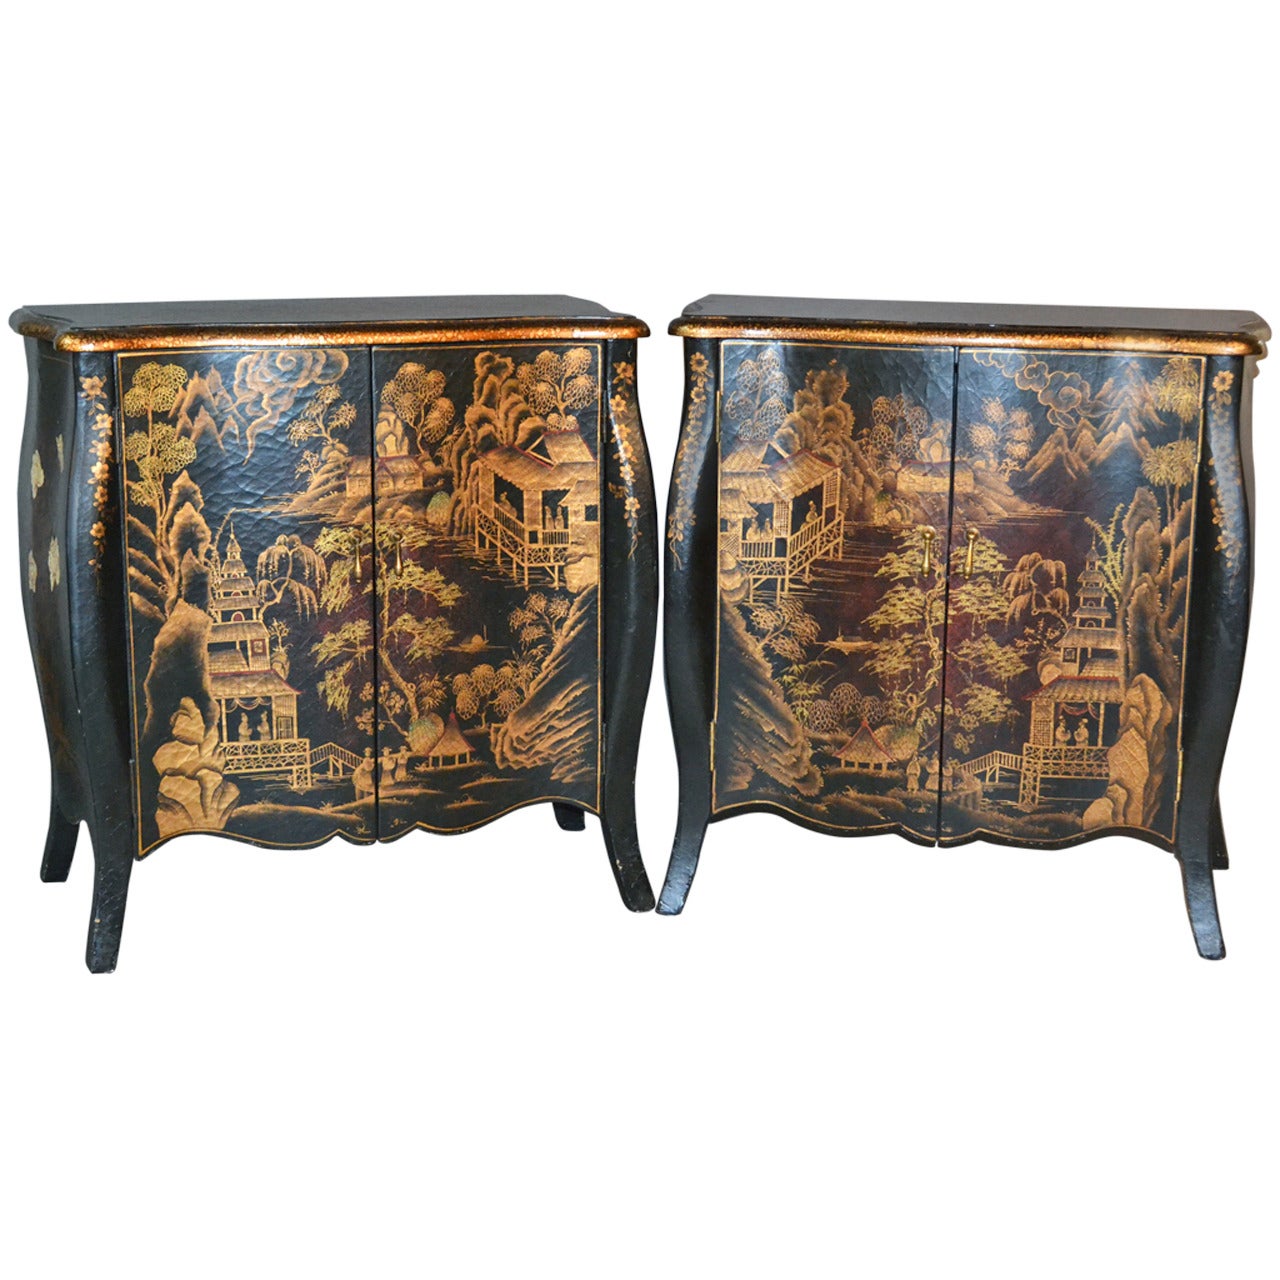 Pair of Chinoiserie Hand-Painted Demilune Commodes